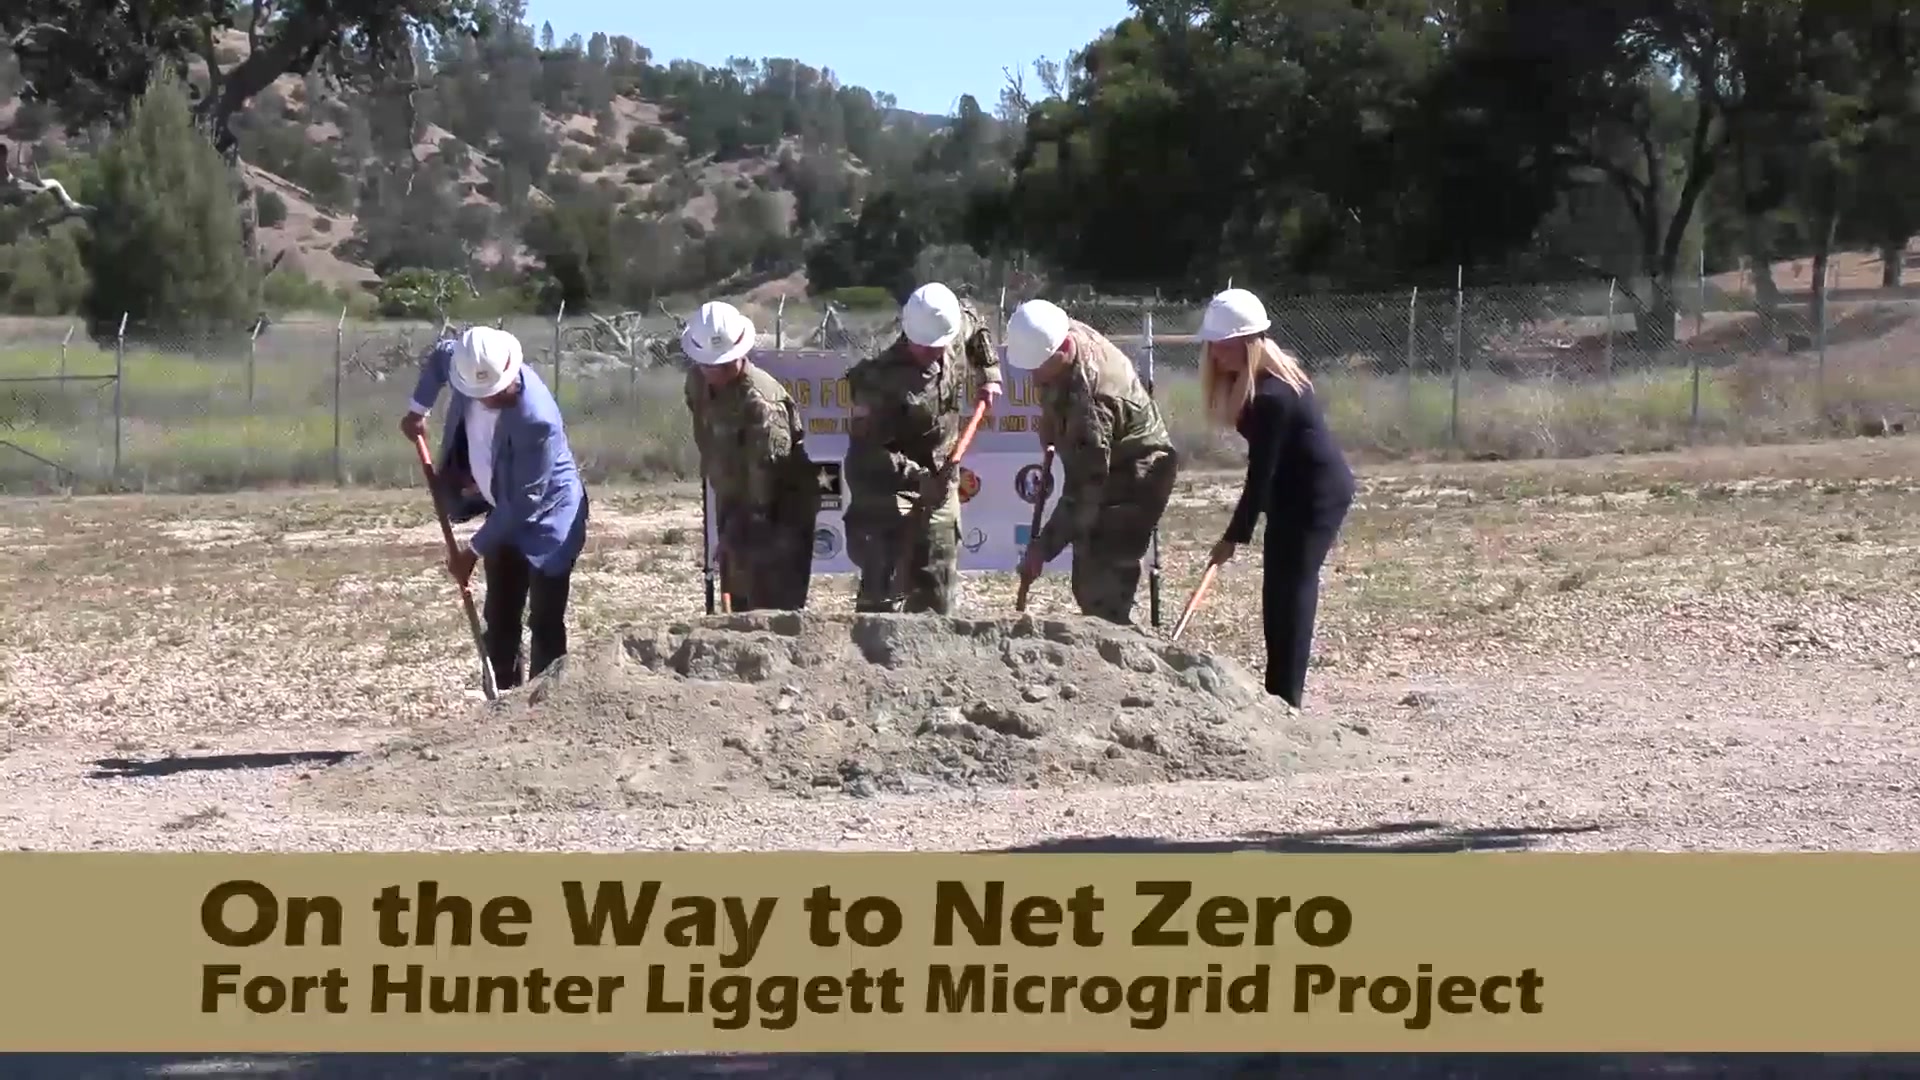 Fort Hunter Liggett conducted a groundbreaking ceremony May 27, 2021 to build a $21.6 million electrical microgrid, which will make it the first Army installation to achieve Net Zero for critical operations. That means it will be capable of generating and distributing electricity for 14-days of energy resiliency. It is an important first step in scaling this type of energy self-sufficiency throughout the Department of Defense.